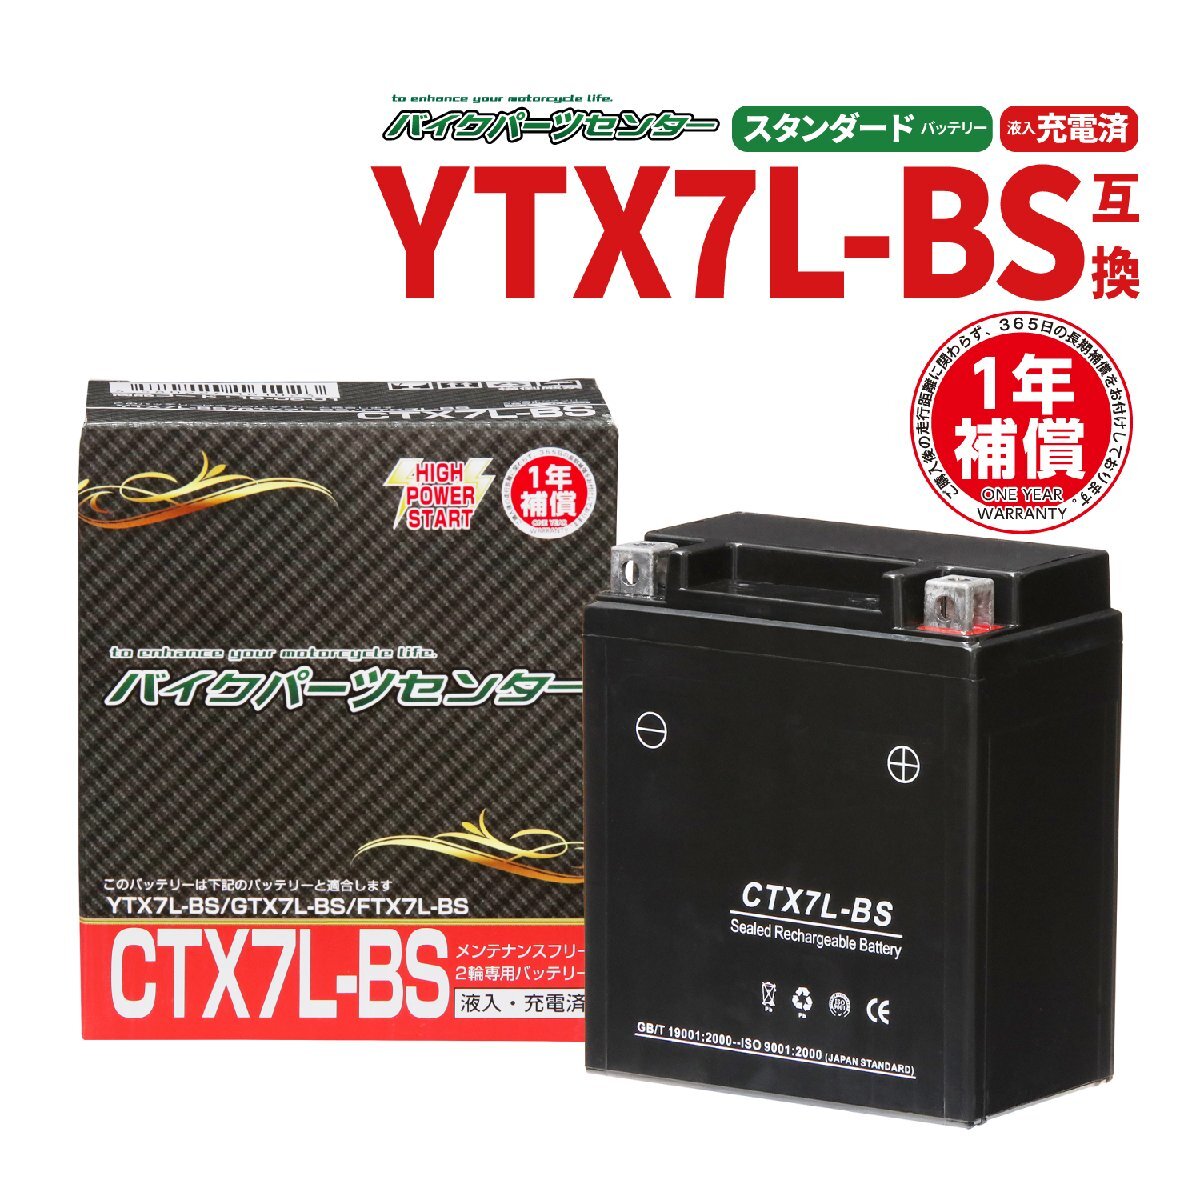 YTX7L-BS互換 CTX7L-BS バイク バッテリー リード110 Dio110 1年間保証 新品 充電済み バイクパーツセンター_画像1